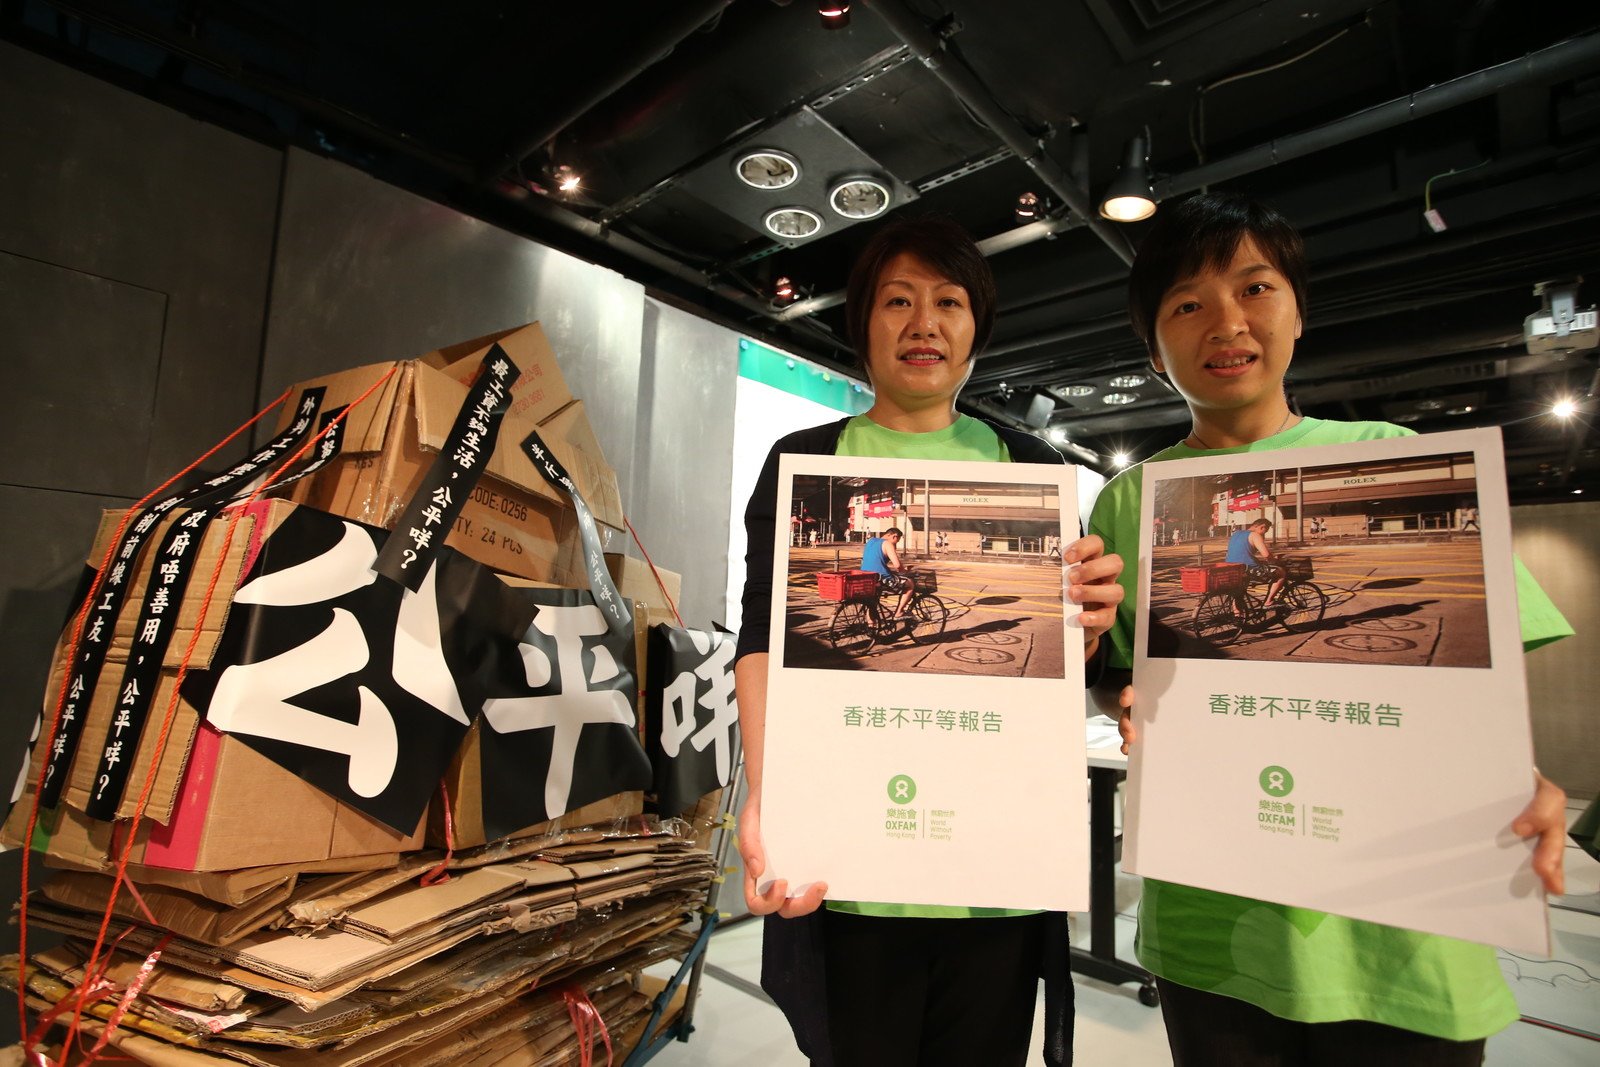 Kalina Tsang, Head of Oxfam’s Hong Kong, Macau, Taiwan Programme (left) ,and Wong Shek-hung, Hong Kong Programme Manager at Oxfam (right) shared Oxfam’s latest report, which revealed that local wealth inequality has worsened as the richest now earn 44 times more than poorest.